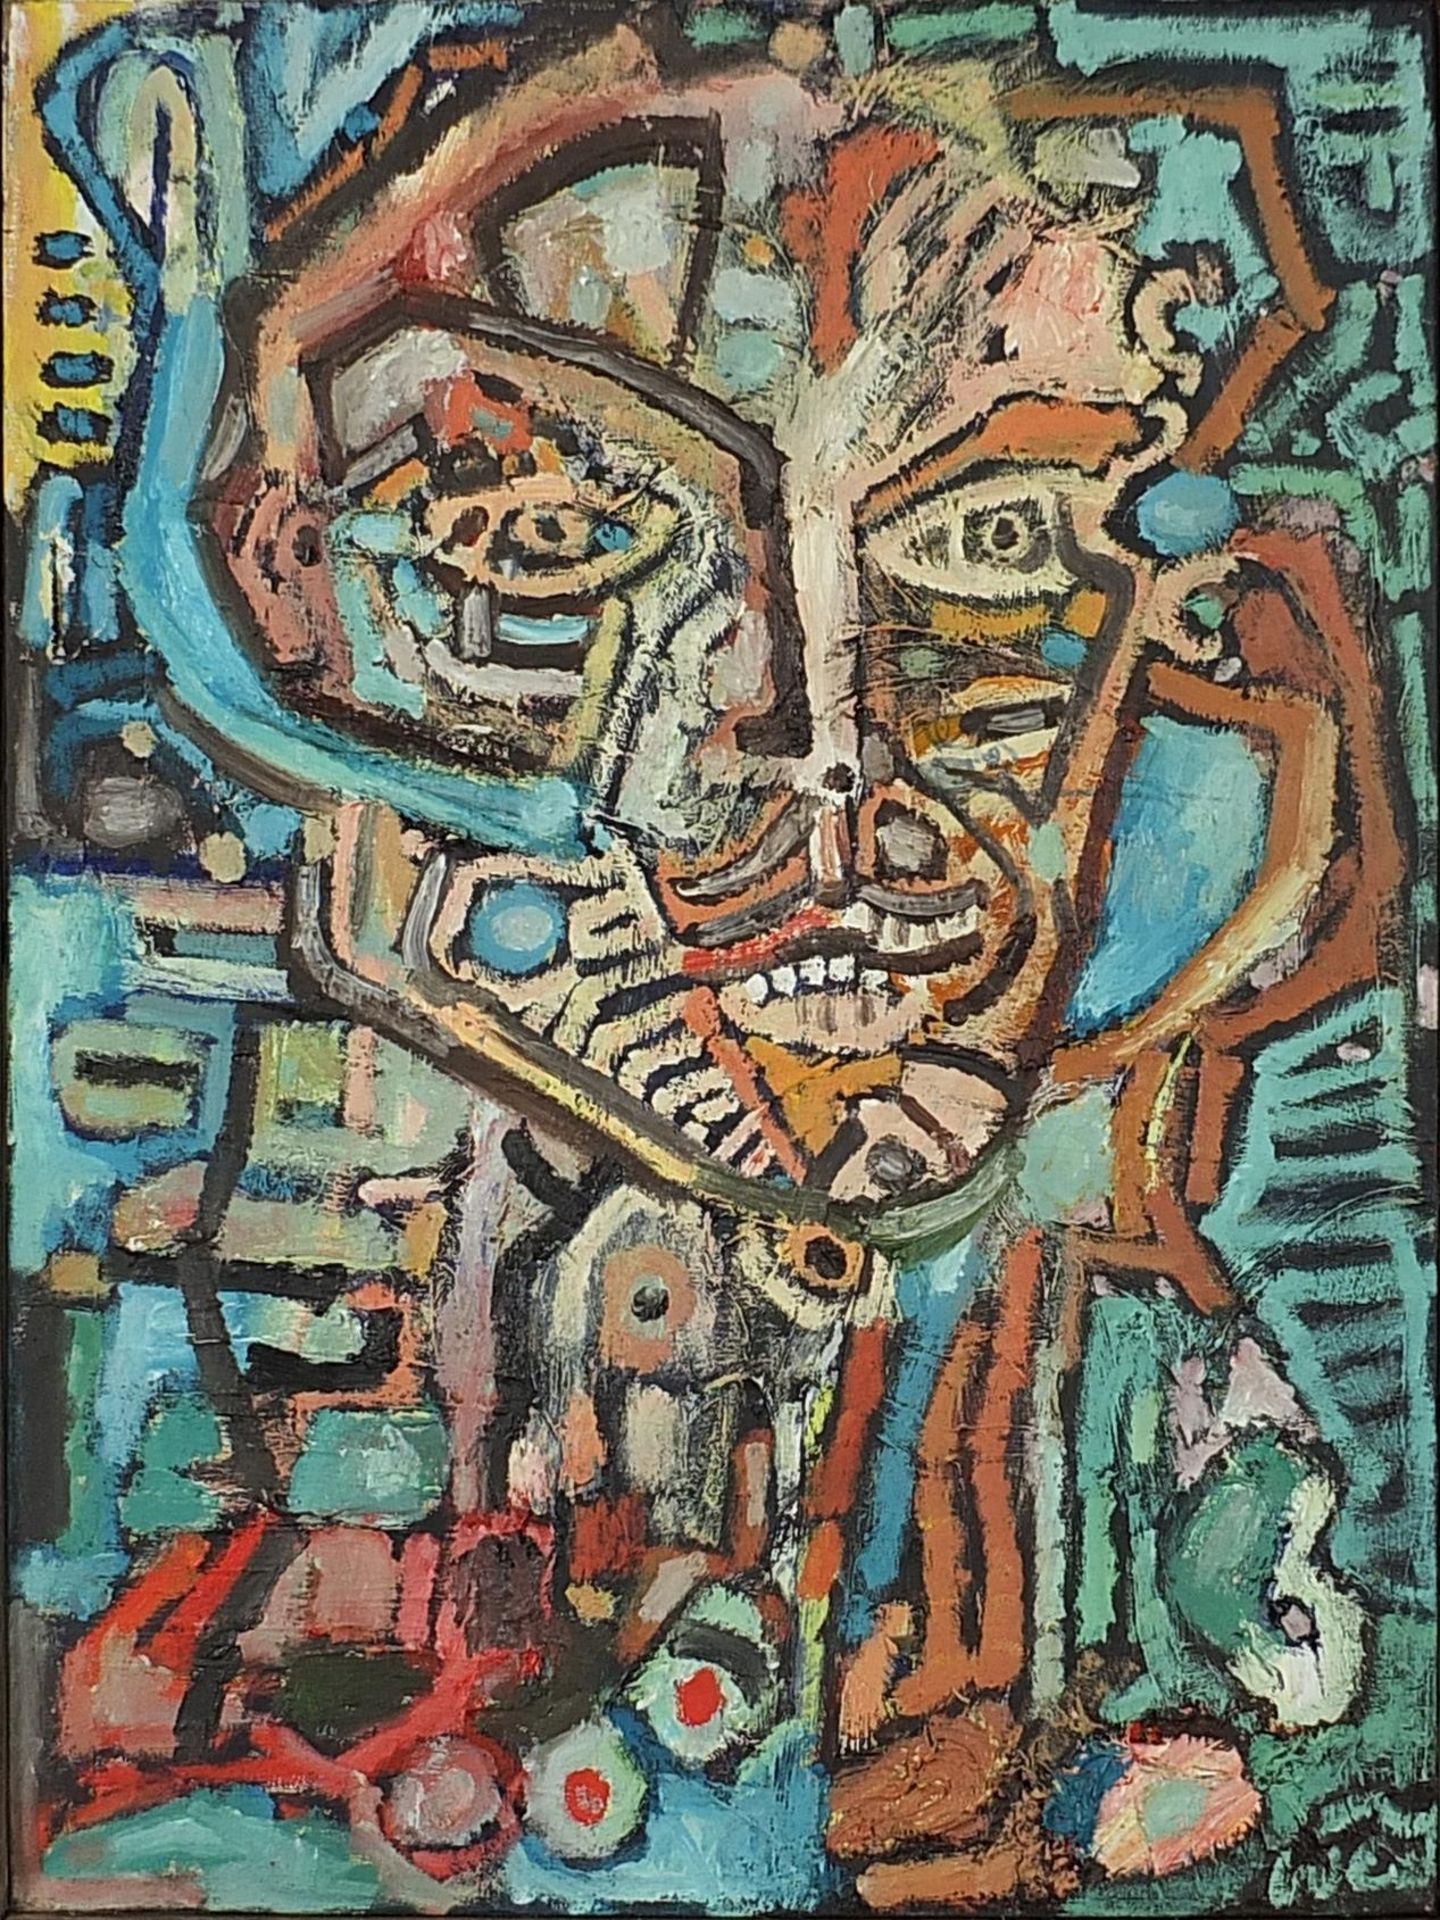 Abstract composition, portrait of a figure, impasto oil on canvas, framed, 61cm x 45.5cm excluding